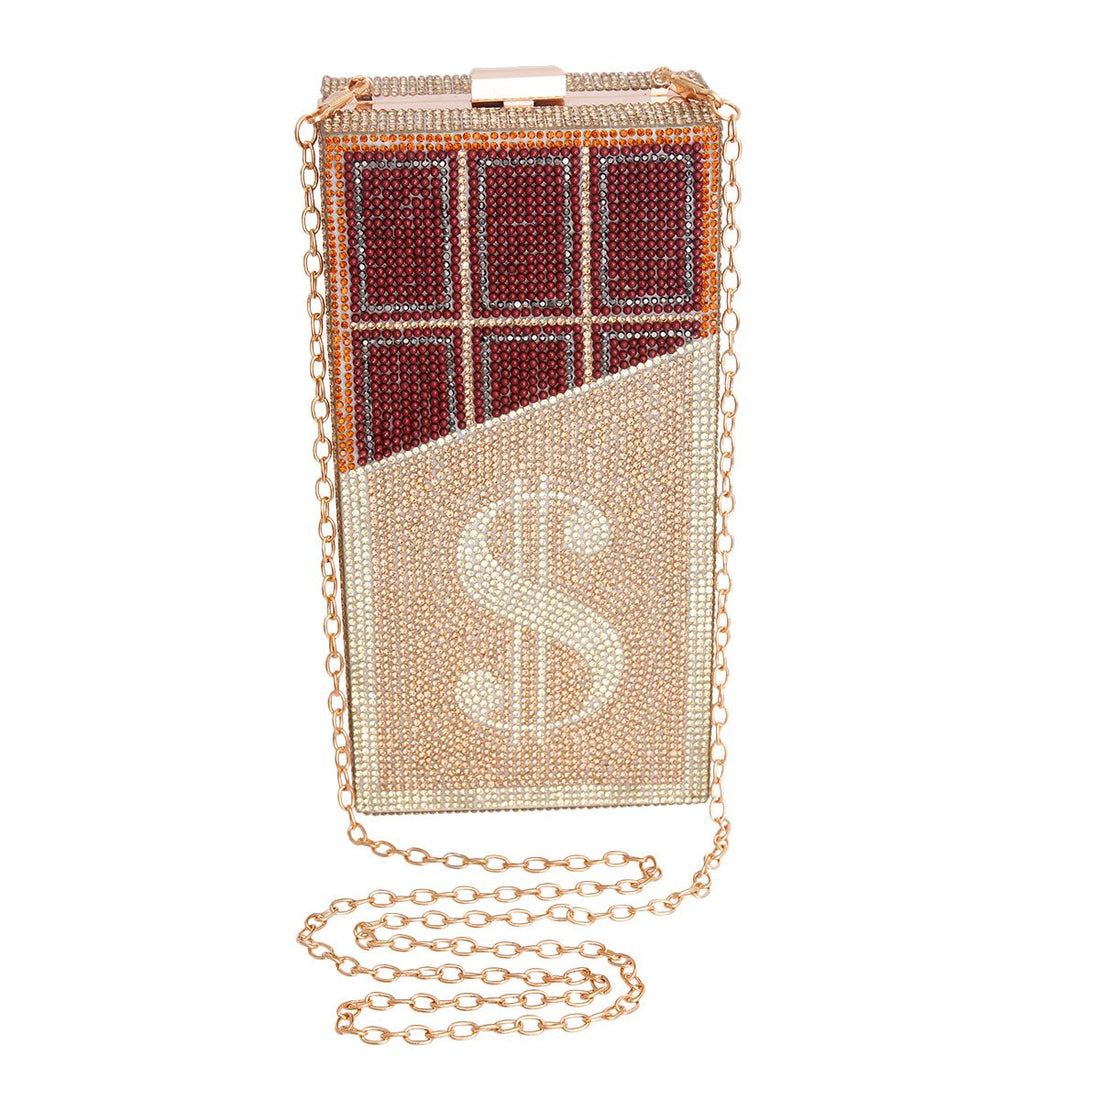 Gold Bling Chocolate Money Clutch